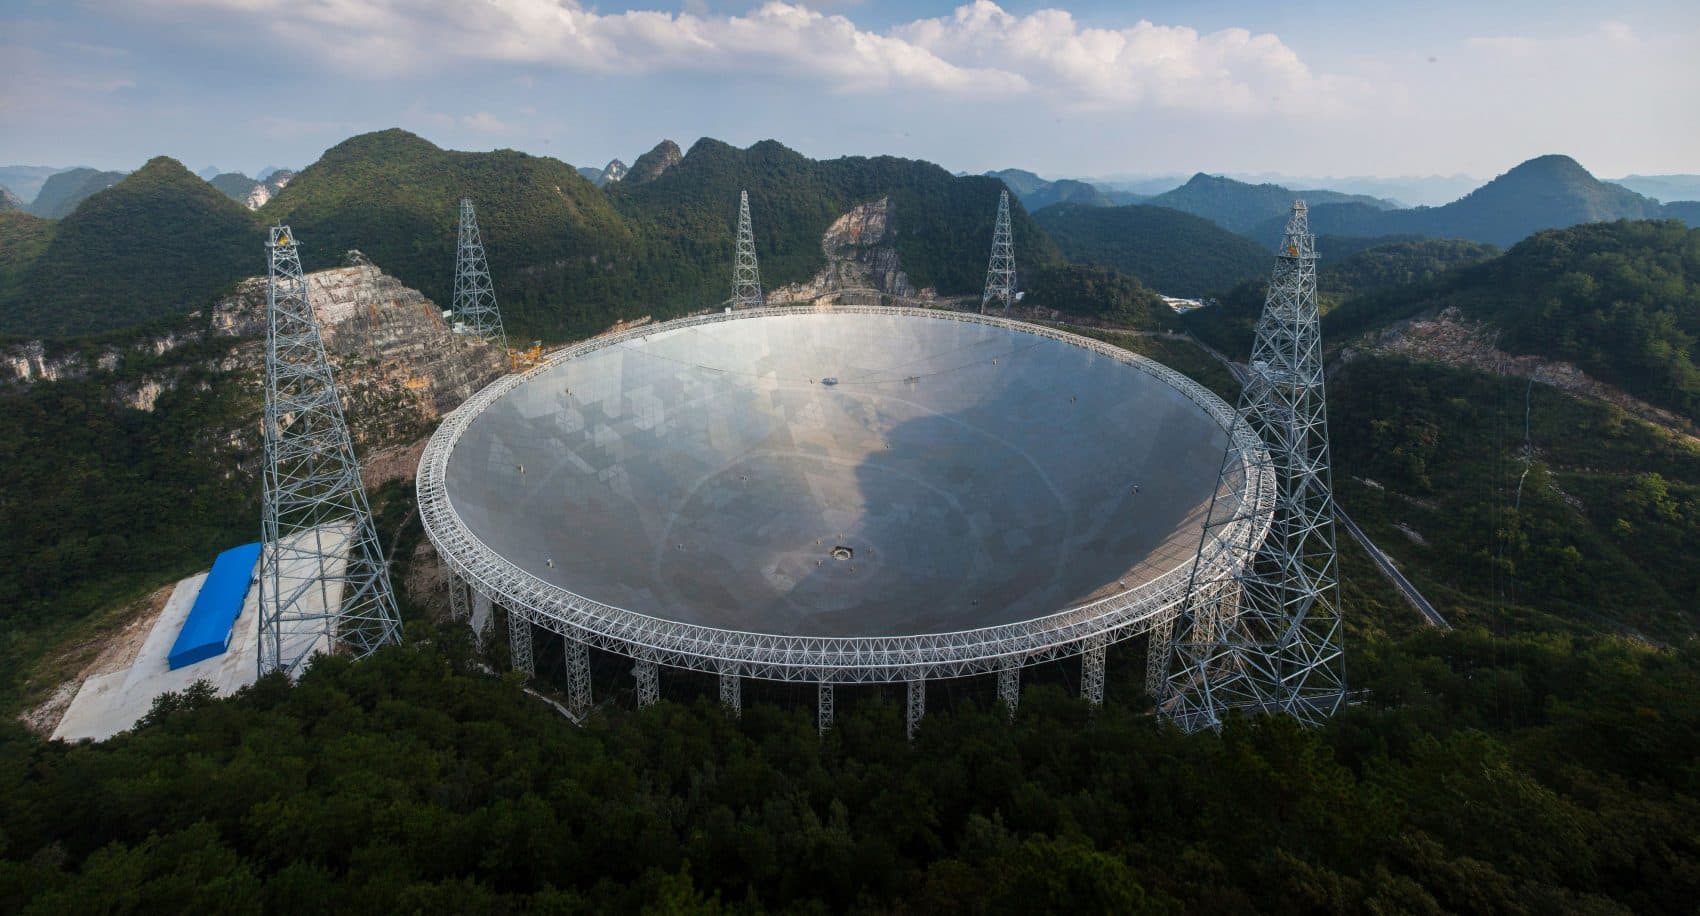 This picture taken on Sept. 24, 2016 shows the Aperture Spherical Radio Telescope (FAST) in Pingtang, in southwestern China's Guizhou province. (STR/AFP/Getty Images)